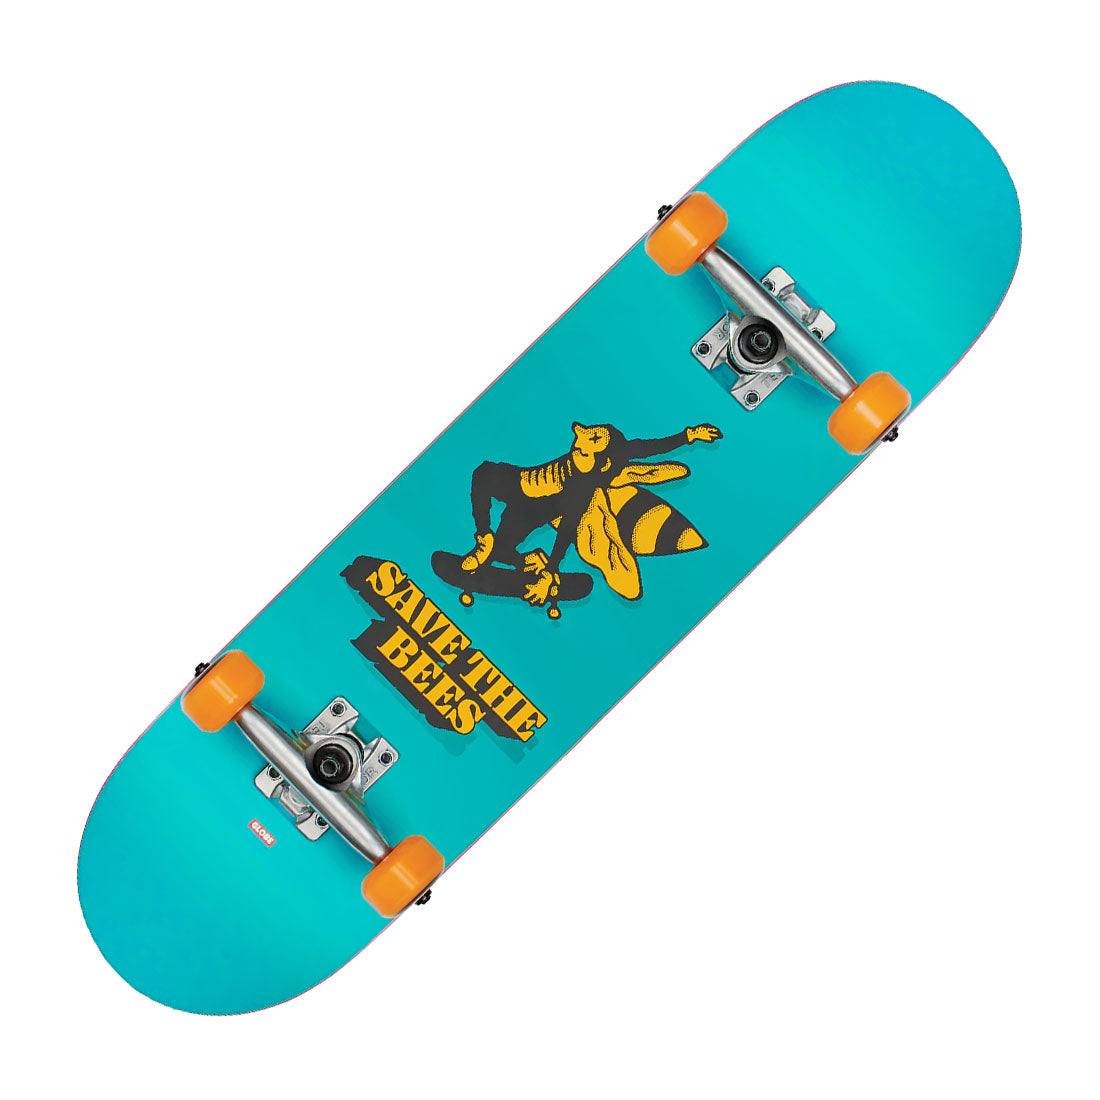 Globe Save The Bees 7.6 Mid Complete - Blue Skateboard Completes Modern Street